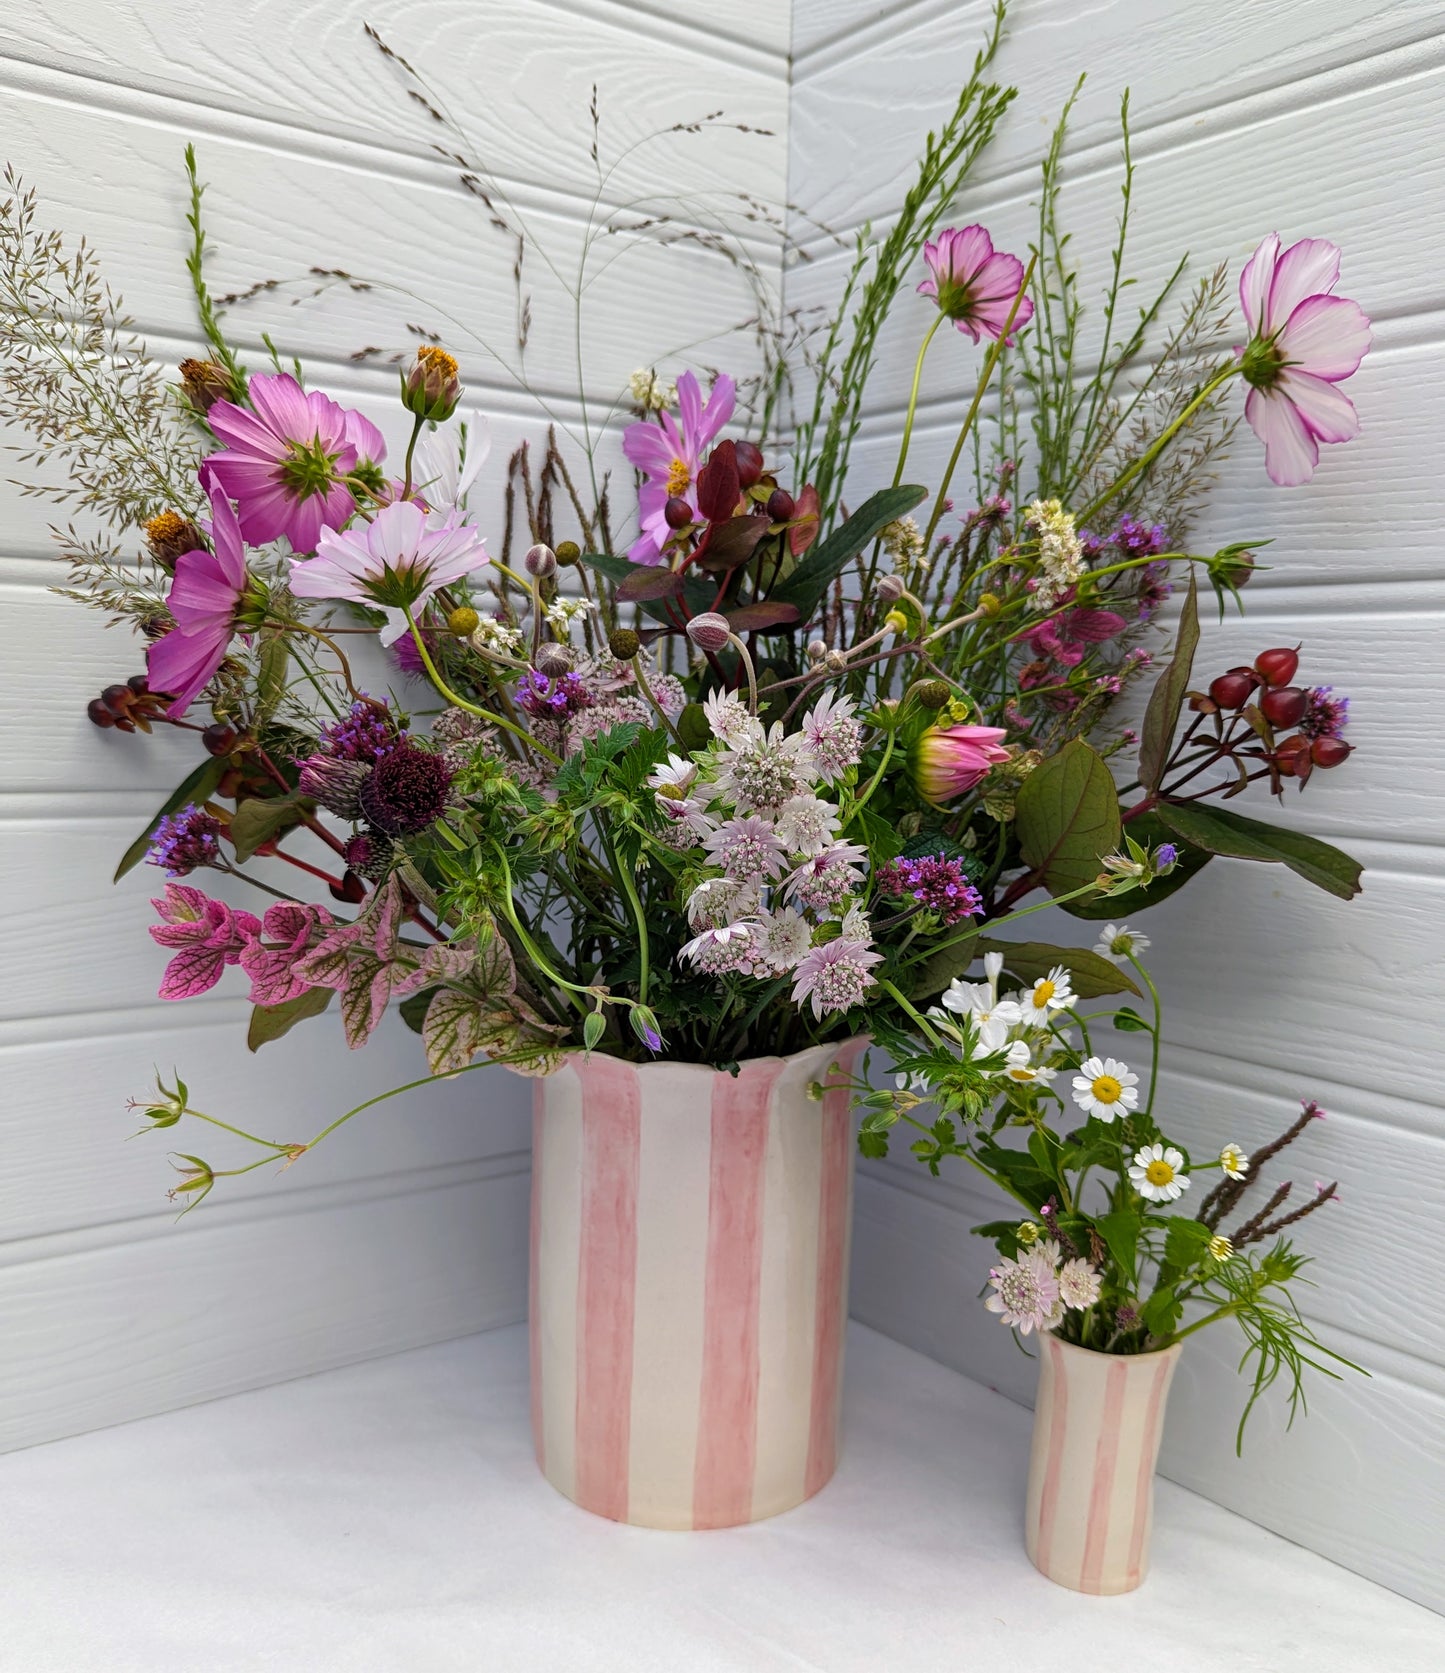 Sea Bramble Ceramics - Handmade, Extra-large, Stoneware vase from their Daisy vase range. With pink stripes and a scalloped top, this vase is ideal for fuller, larger flower arrangements. Shown in comparison with a Sea Bramble Ceramics Sweet pea vase.